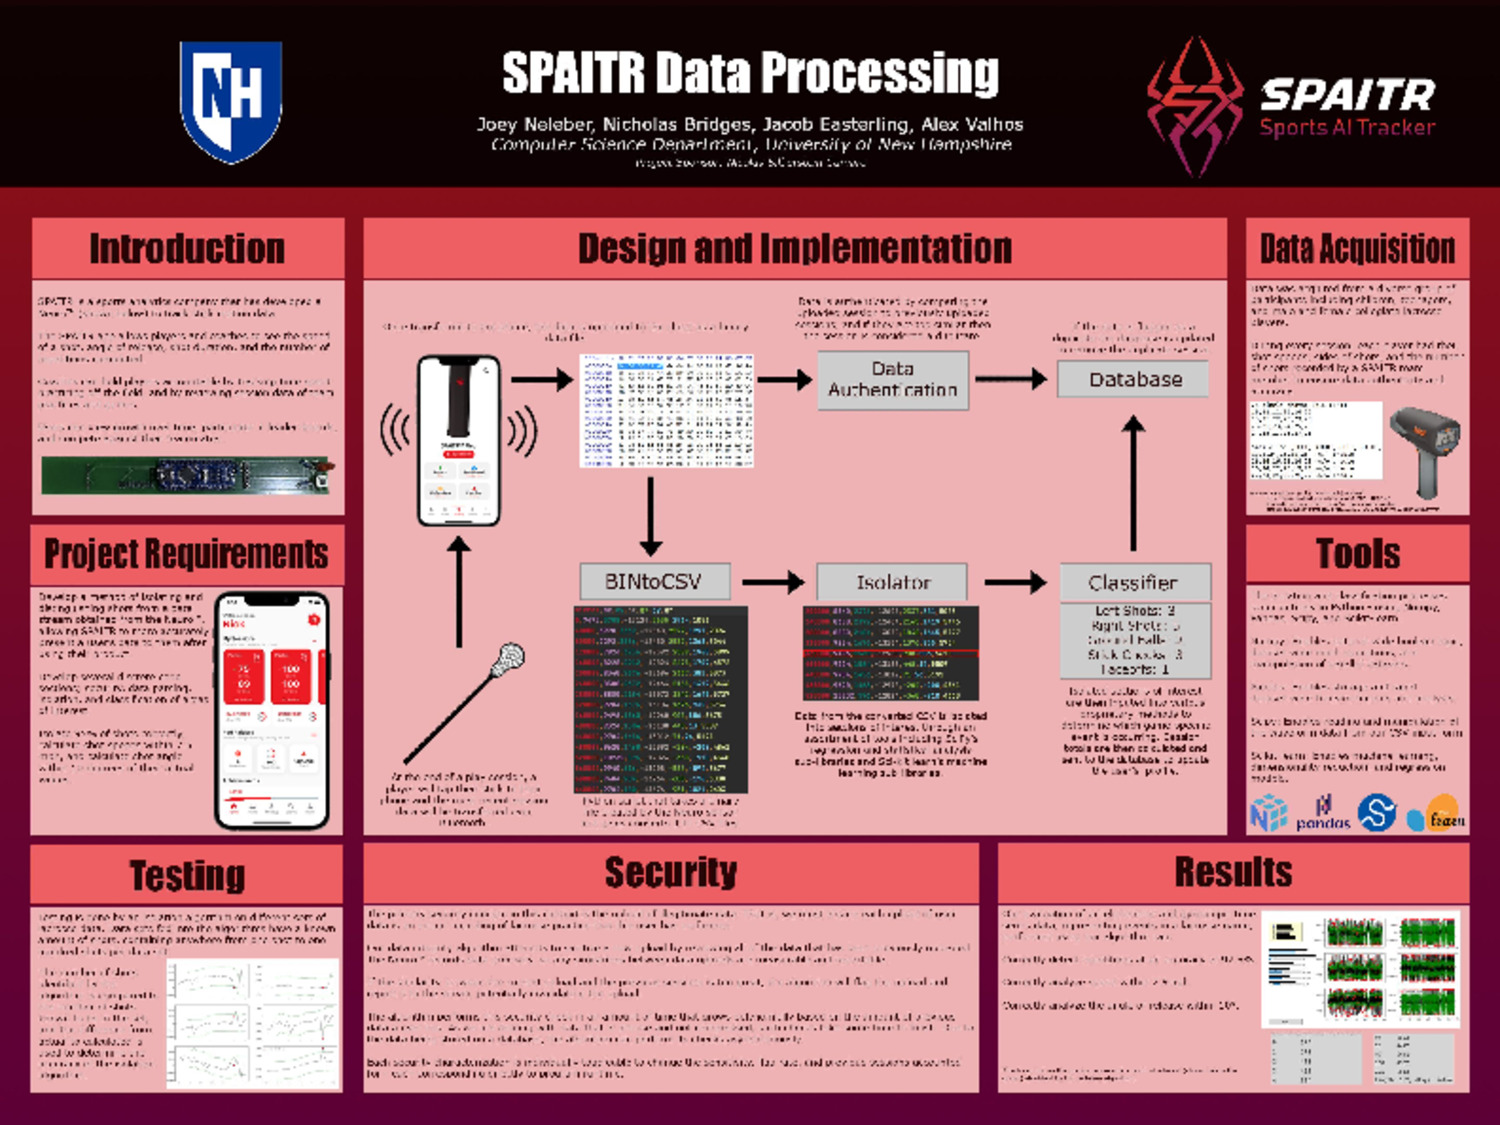 Spaitr Data Processing by acv1009